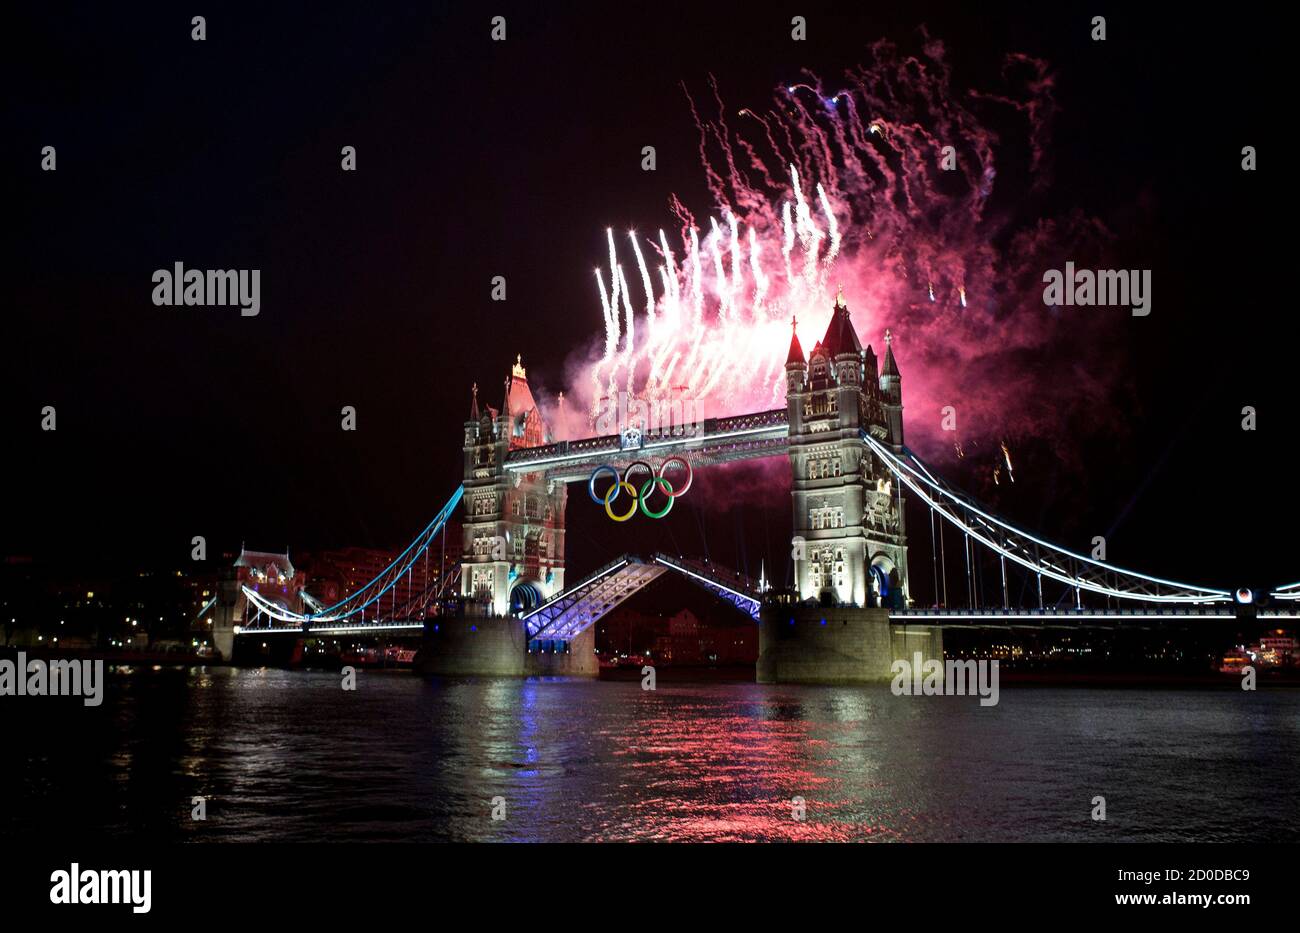 Fireworks explode off the Tower Bridge during the night of the opening ceremony of London 2012 Olympic Games in London July 27, 2012. REUTERS/Mark Blinch (BRITAIN - Tags: SPORT OLYMPICS) Stock Photo